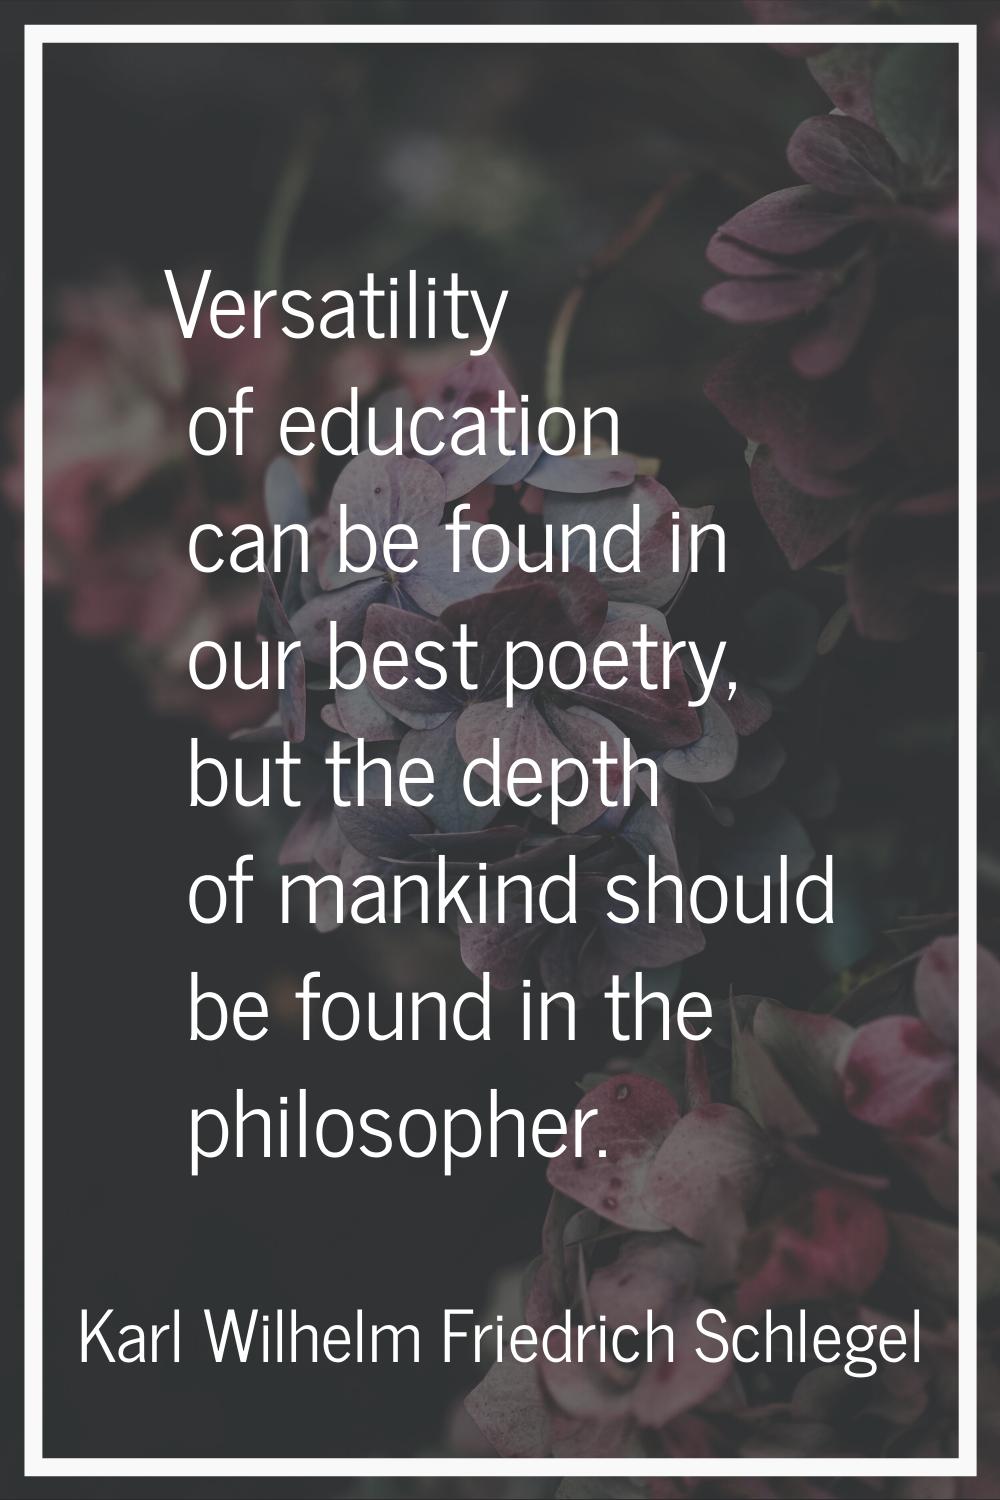 Versatility of education can be found in our best poetry, but the depth of mankind should be found 